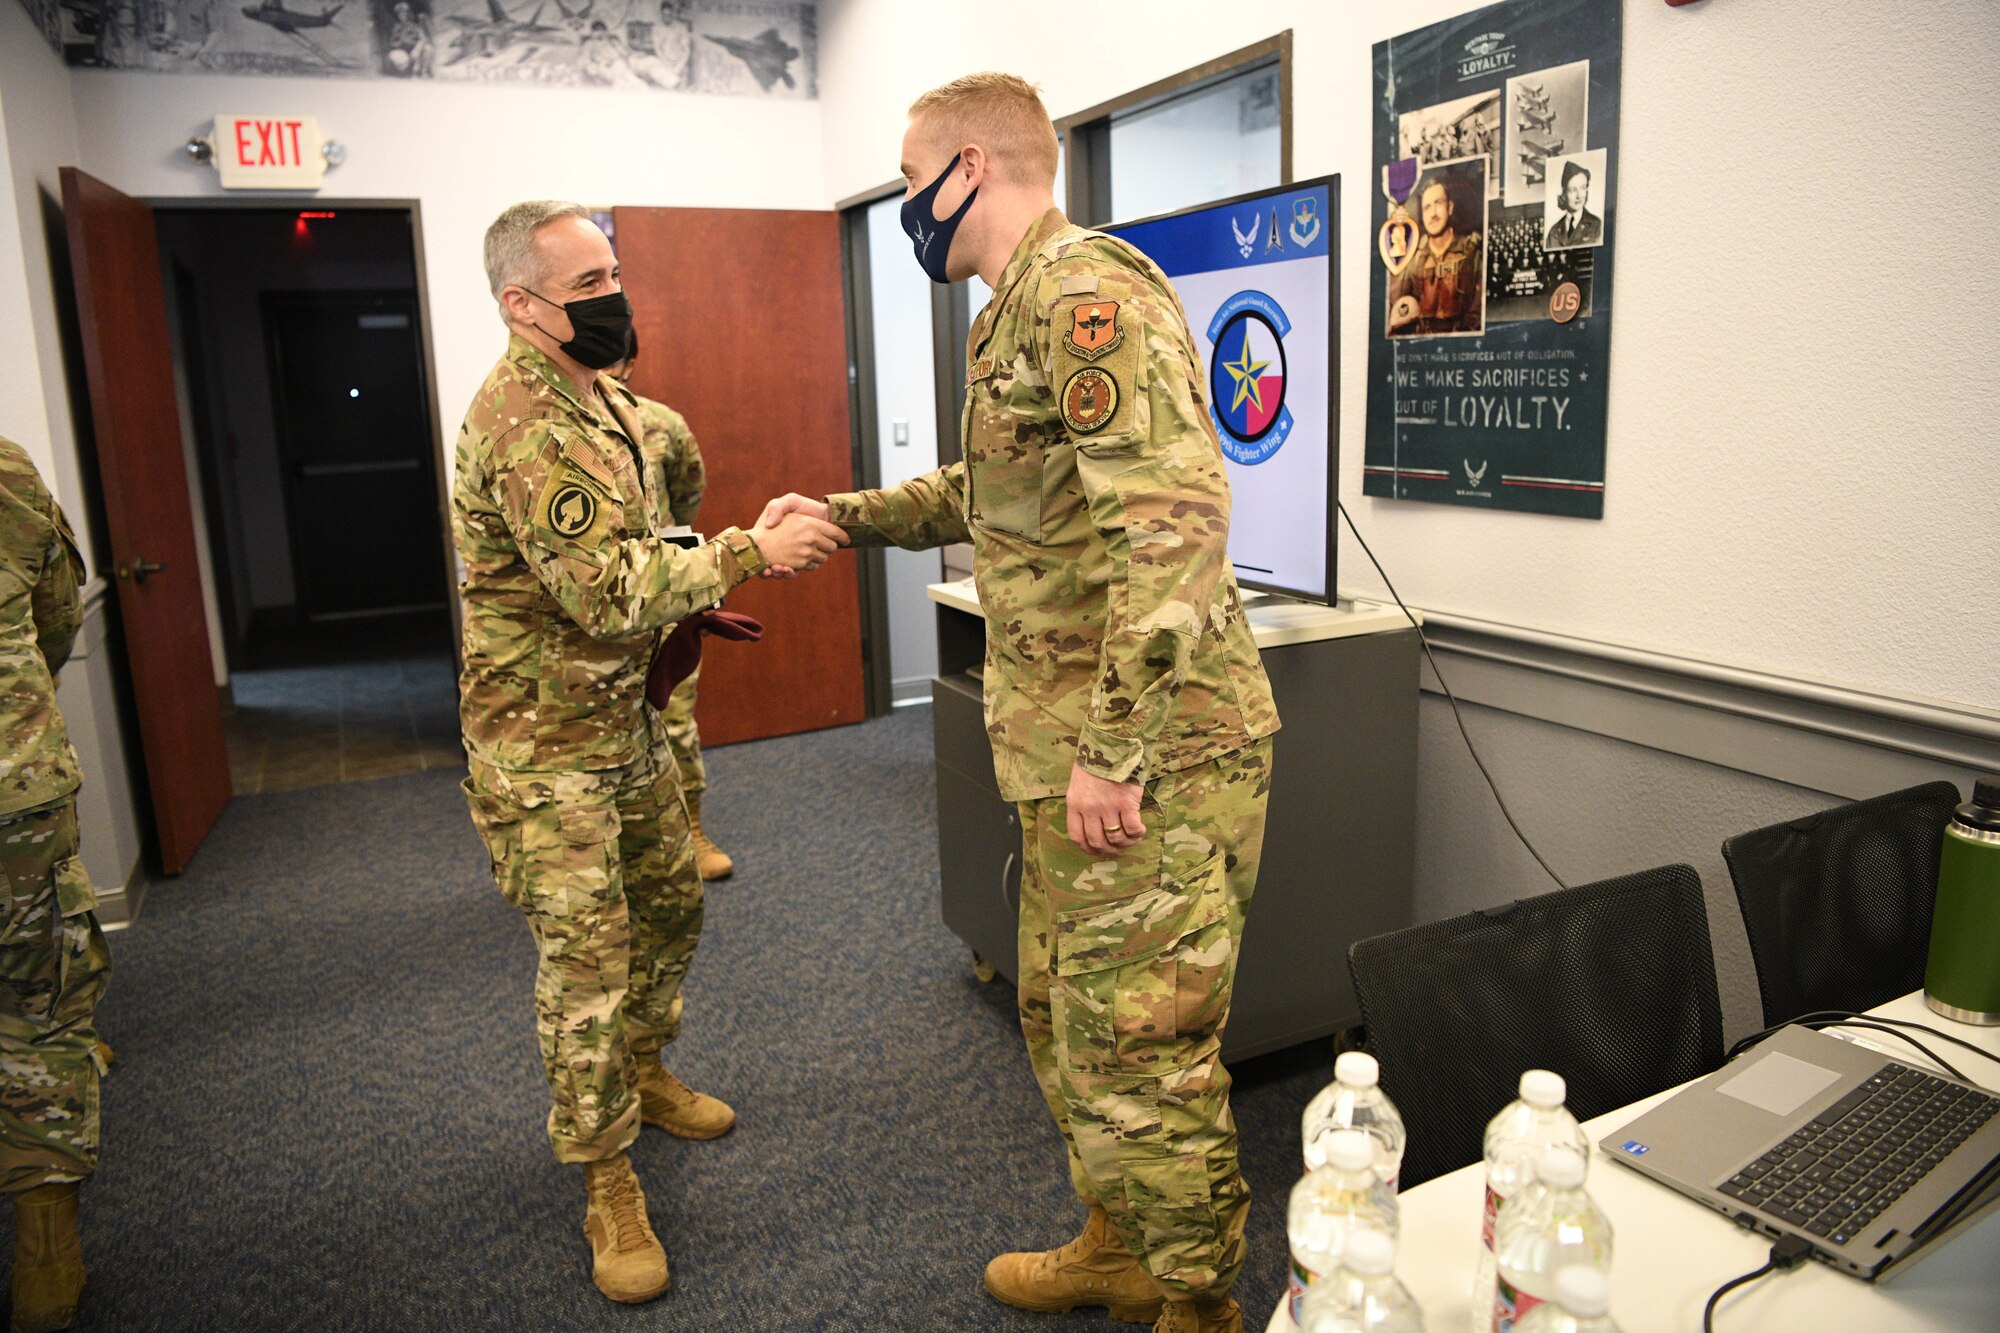 Senior Enlisted Advisor to the Chairman of the Joint Chiefs of Staff (Left) shakes hands with a recruiter at the Live Oak, Texas recruiting station Feb. 9, 2022.